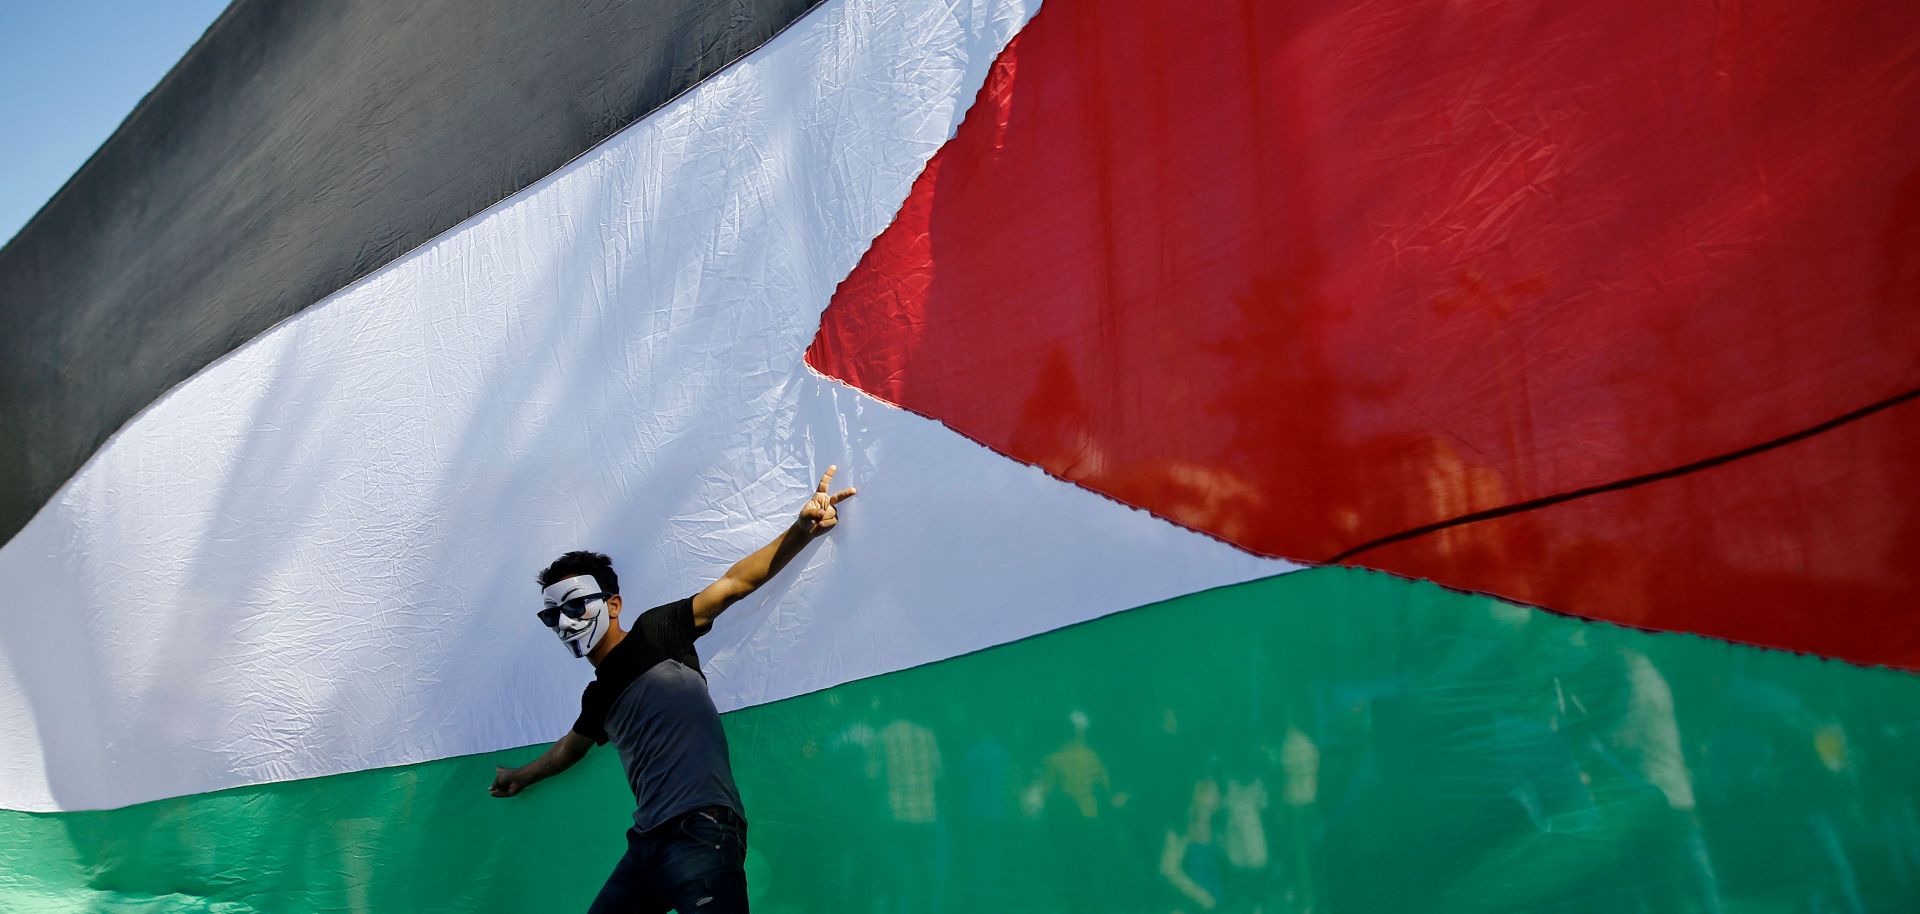 A Palestinian youth poses in front of his national flag during celebrations in Gaza City after rival Palestinian factions Hamas and Fatah reached an agreement ending their decadelong split on Oct. 12.